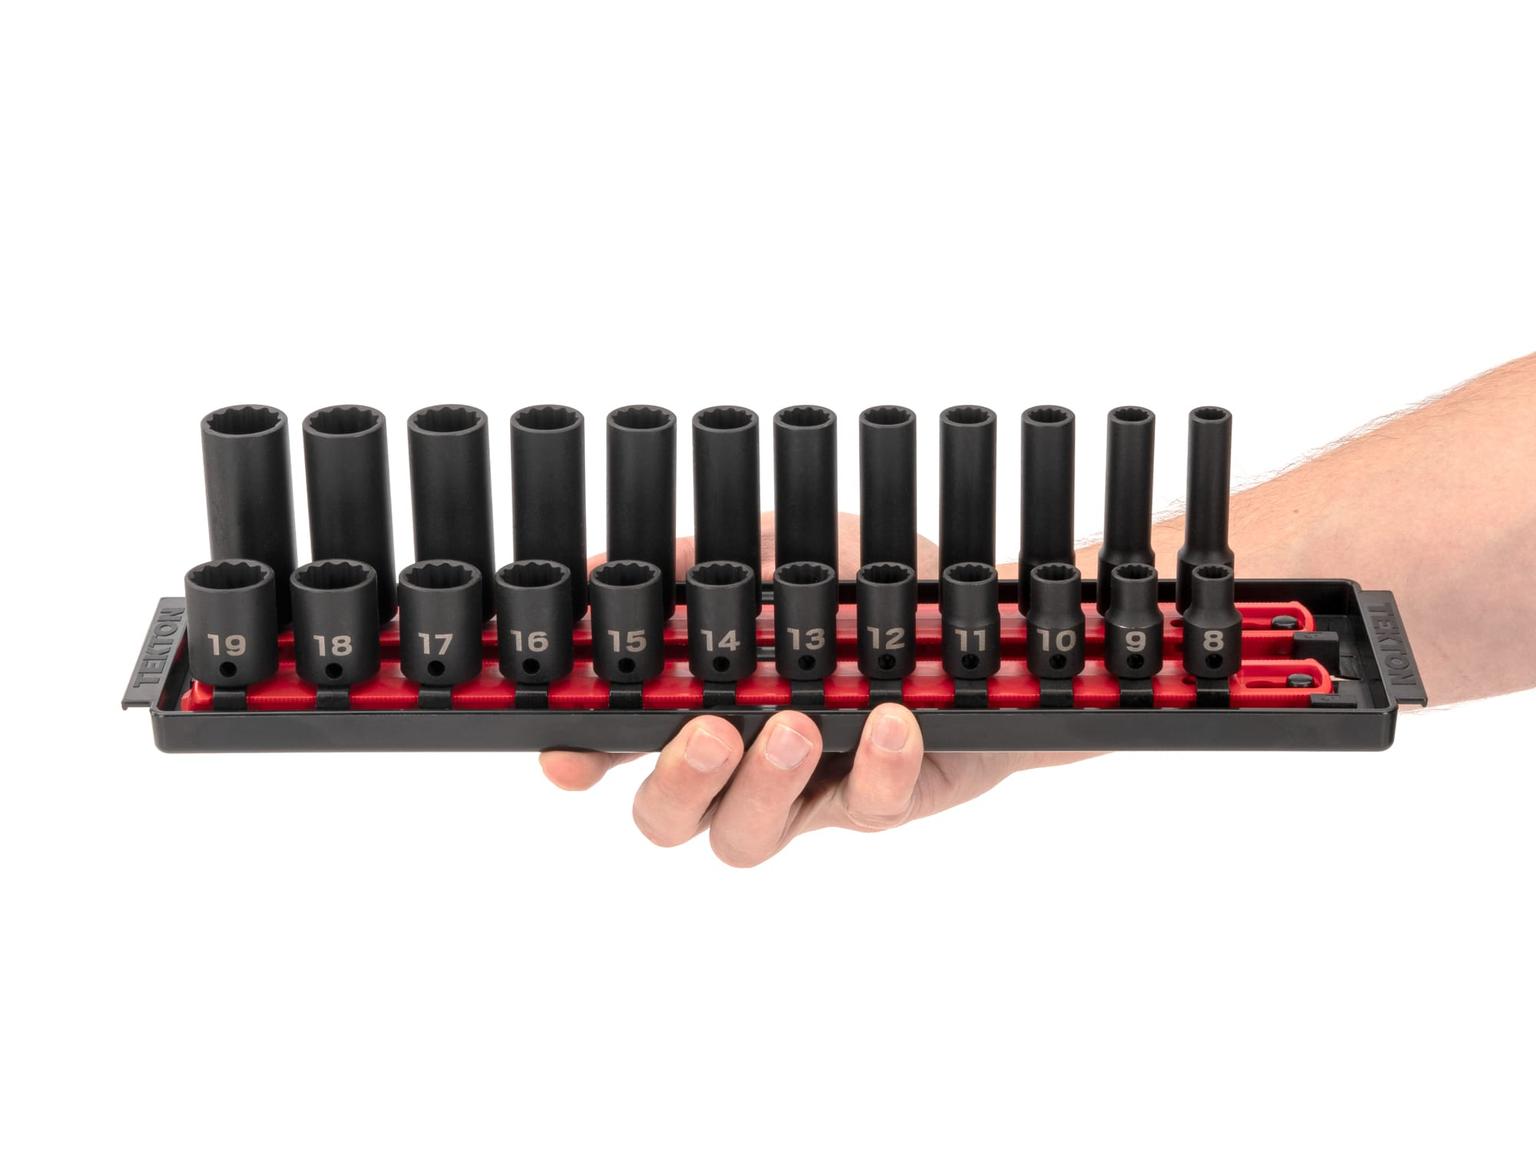 TEKTON SID91217-T 3/8 Inch Drive 12-Point Impact Socket Set with Rails, 42-Piece (5/16-3/4 in., 8-19 mm)